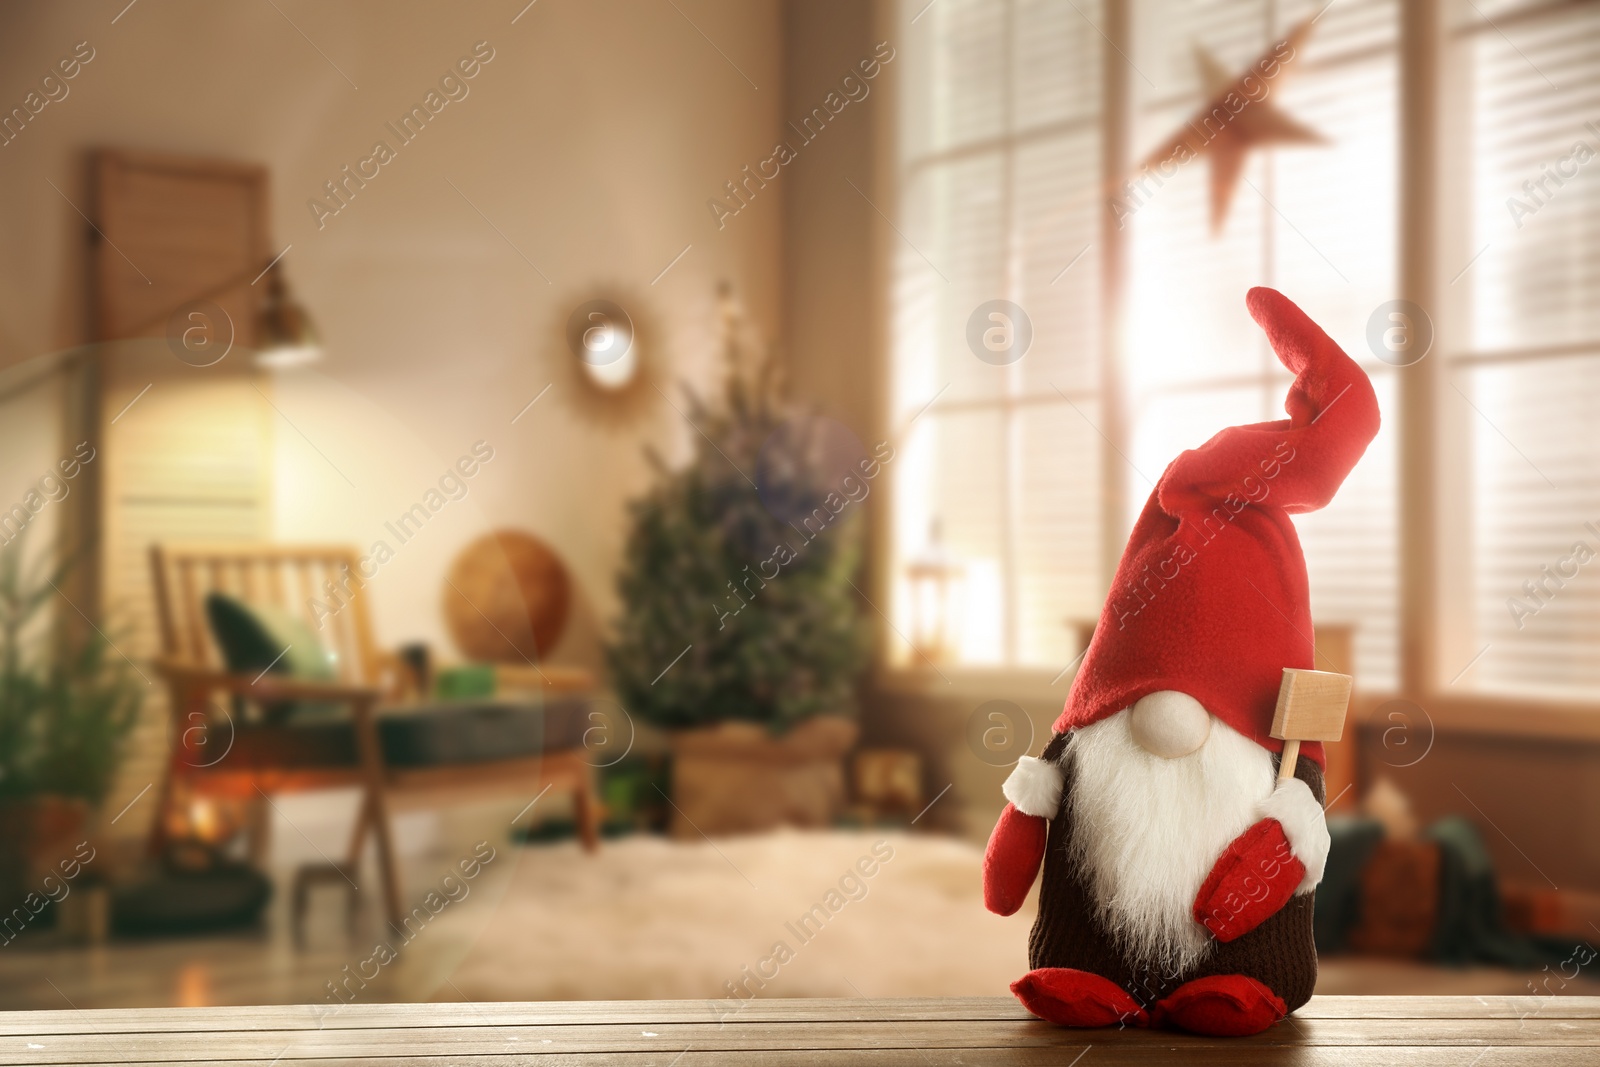 Image of Funny Christmas gnome on wooden table in room with festive decorations. Space for text